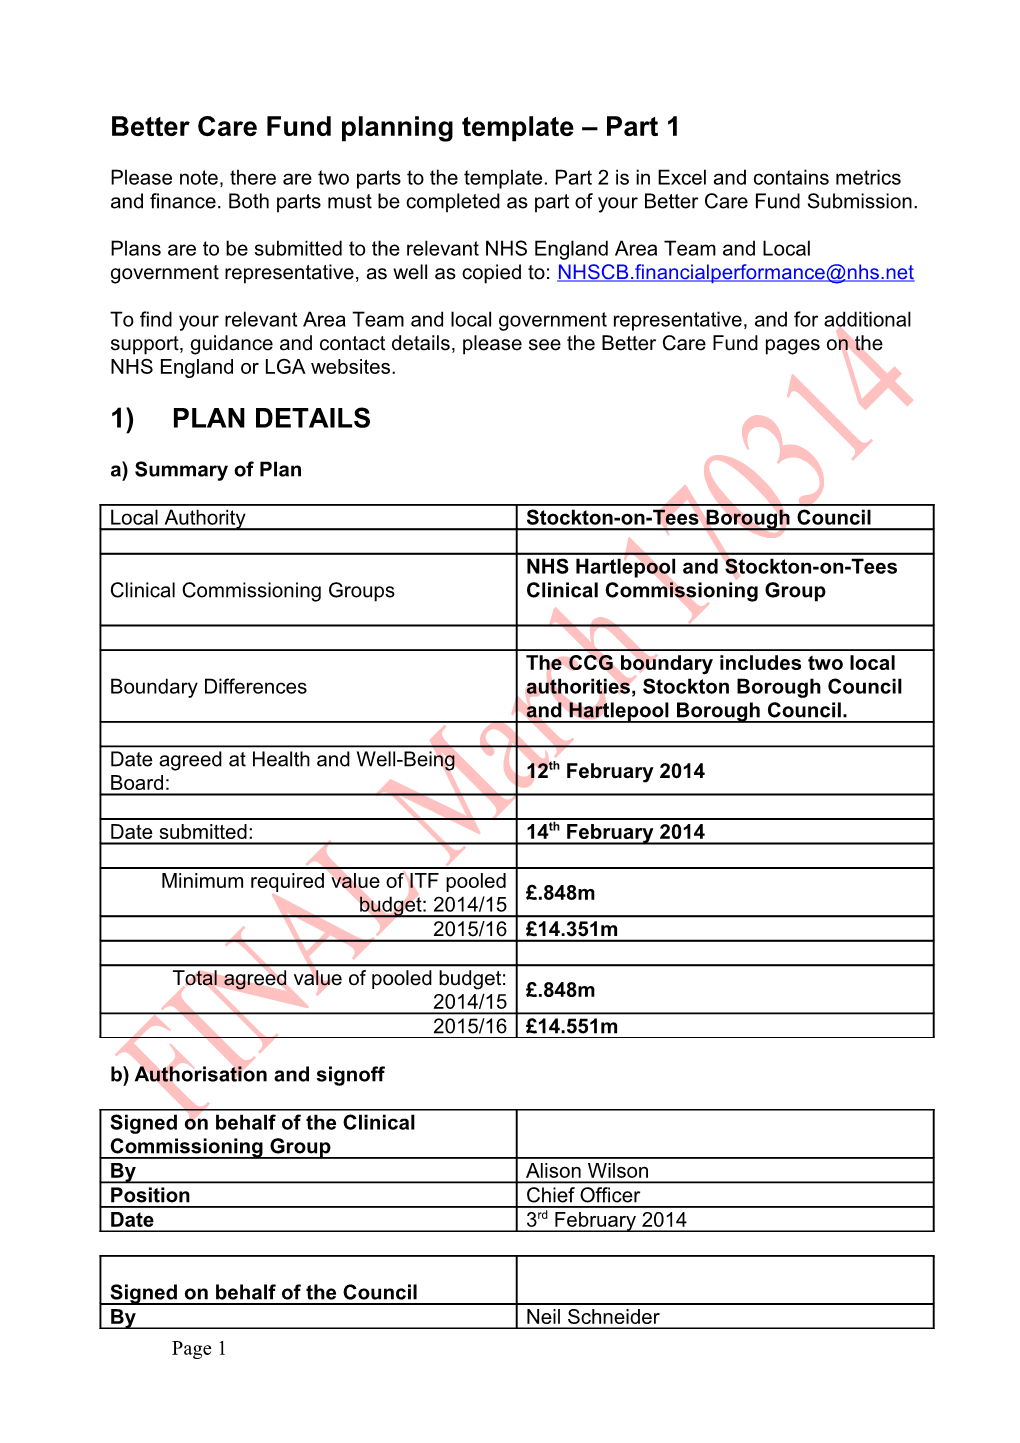 Better Care Fund Planning Template Part 1